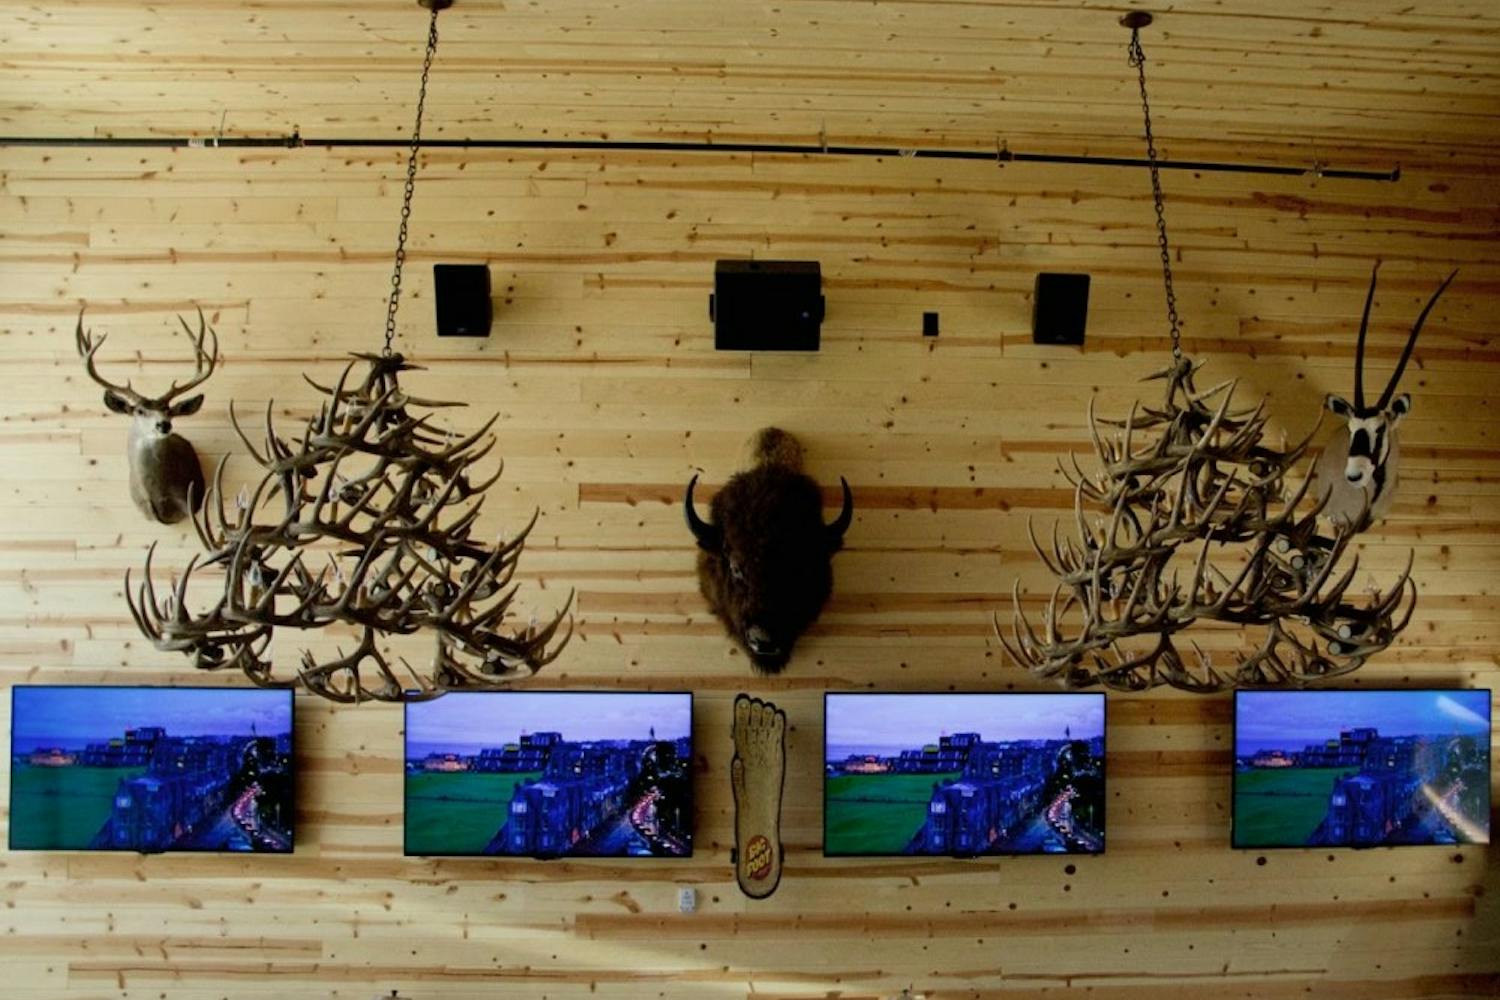 The interior of The Lodge Sasquatch Kitchen contains 30 televisions for guest entertainment. The decor displays wooden walls with mountainous taxidermy.